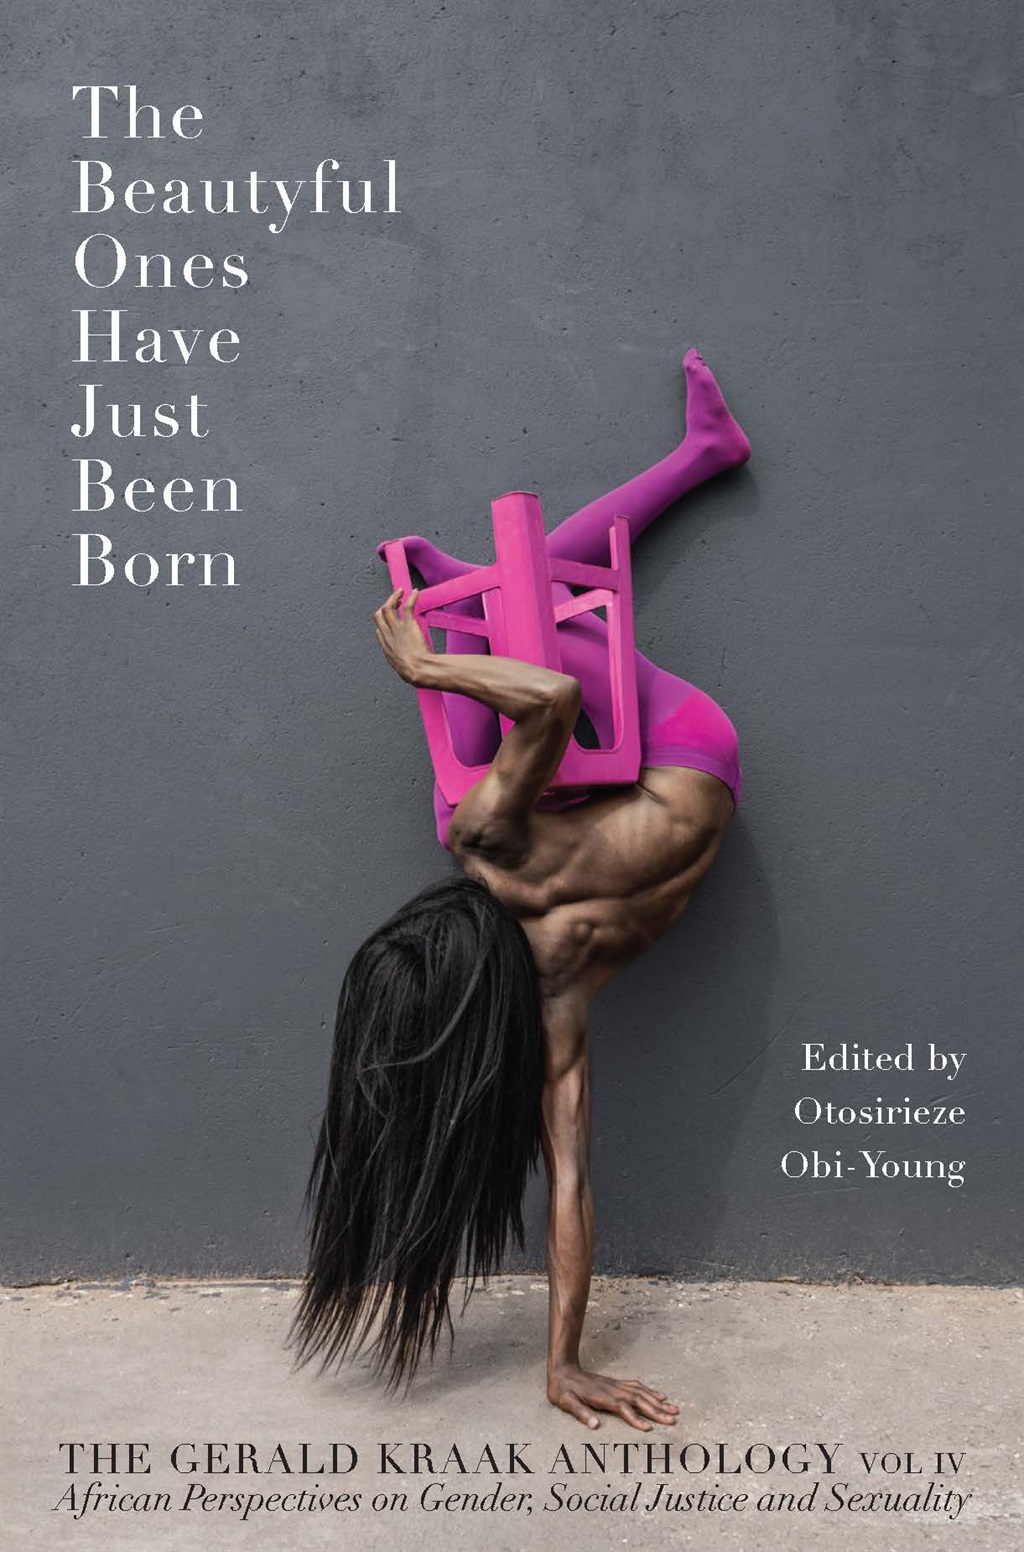 The Beautyful Ones Have Just Been Born: Gerald Kraak Anthology by Otosirieze Obi-Young. (Jacana)